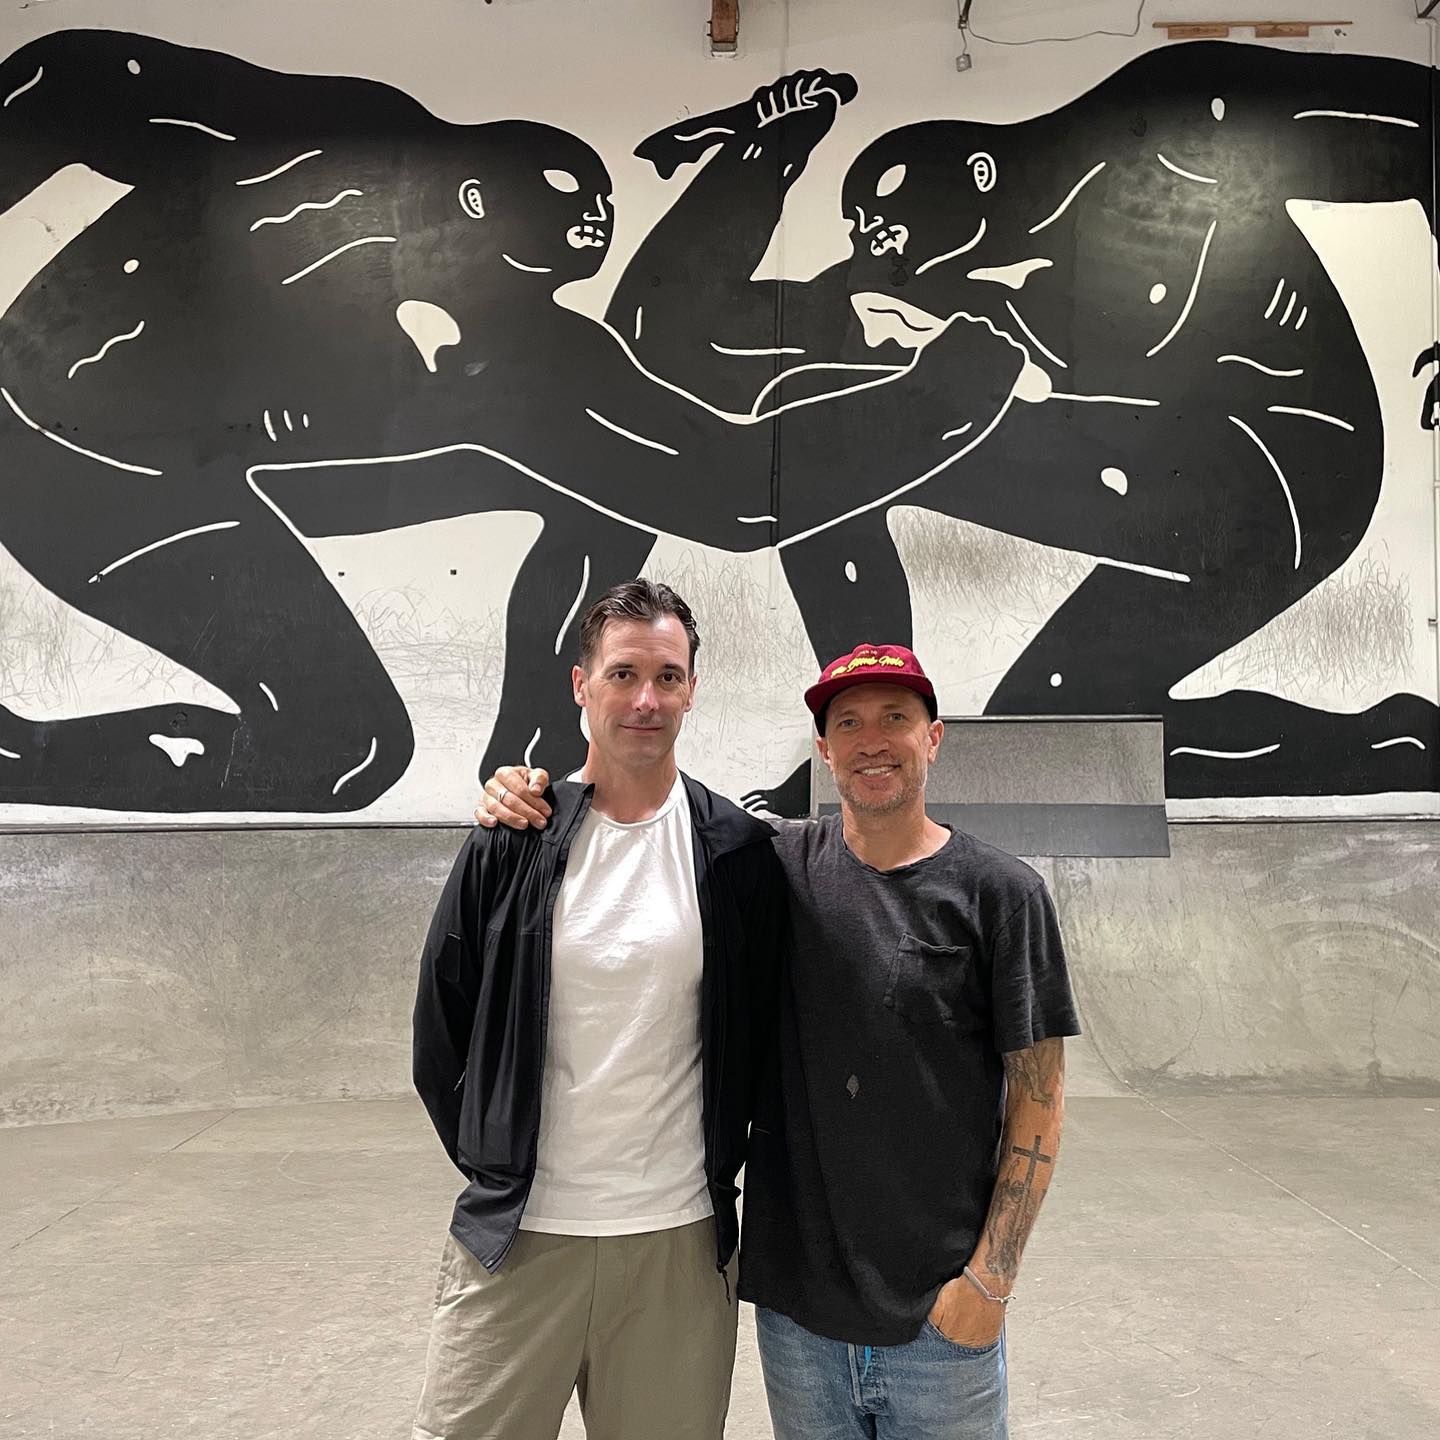 Rule Of Law By Cleon Peterson X Zero Skateboards 5